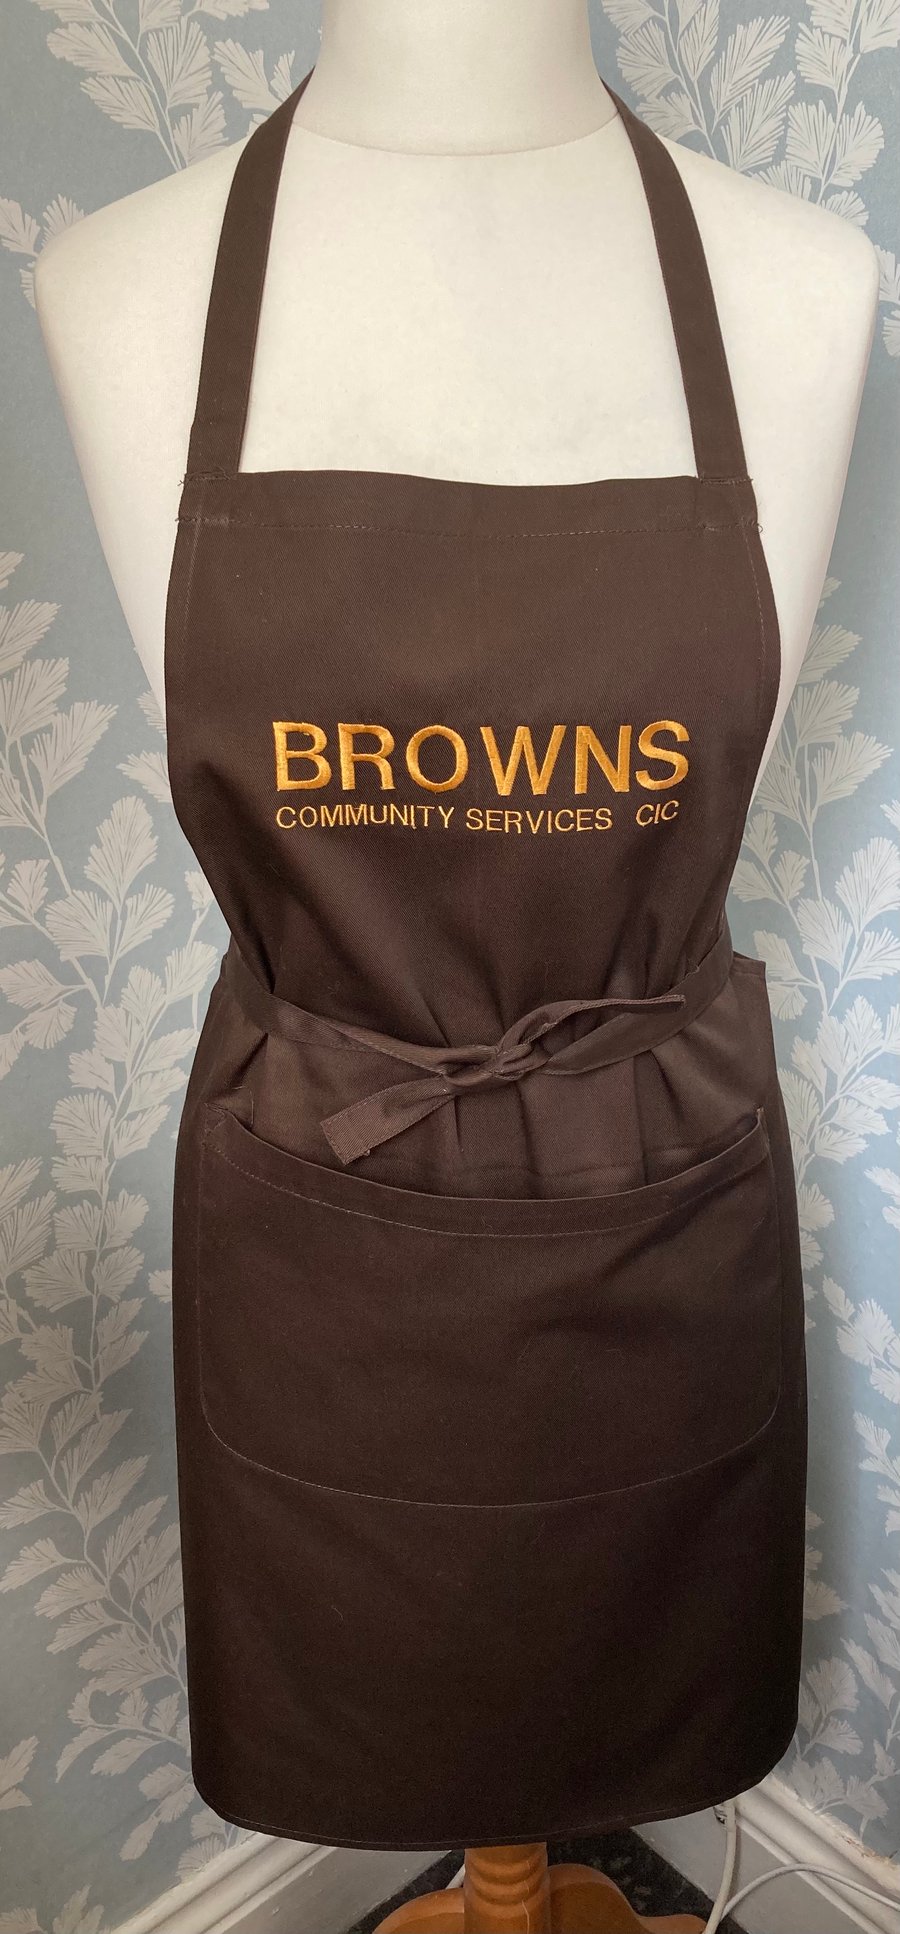 Your business apron